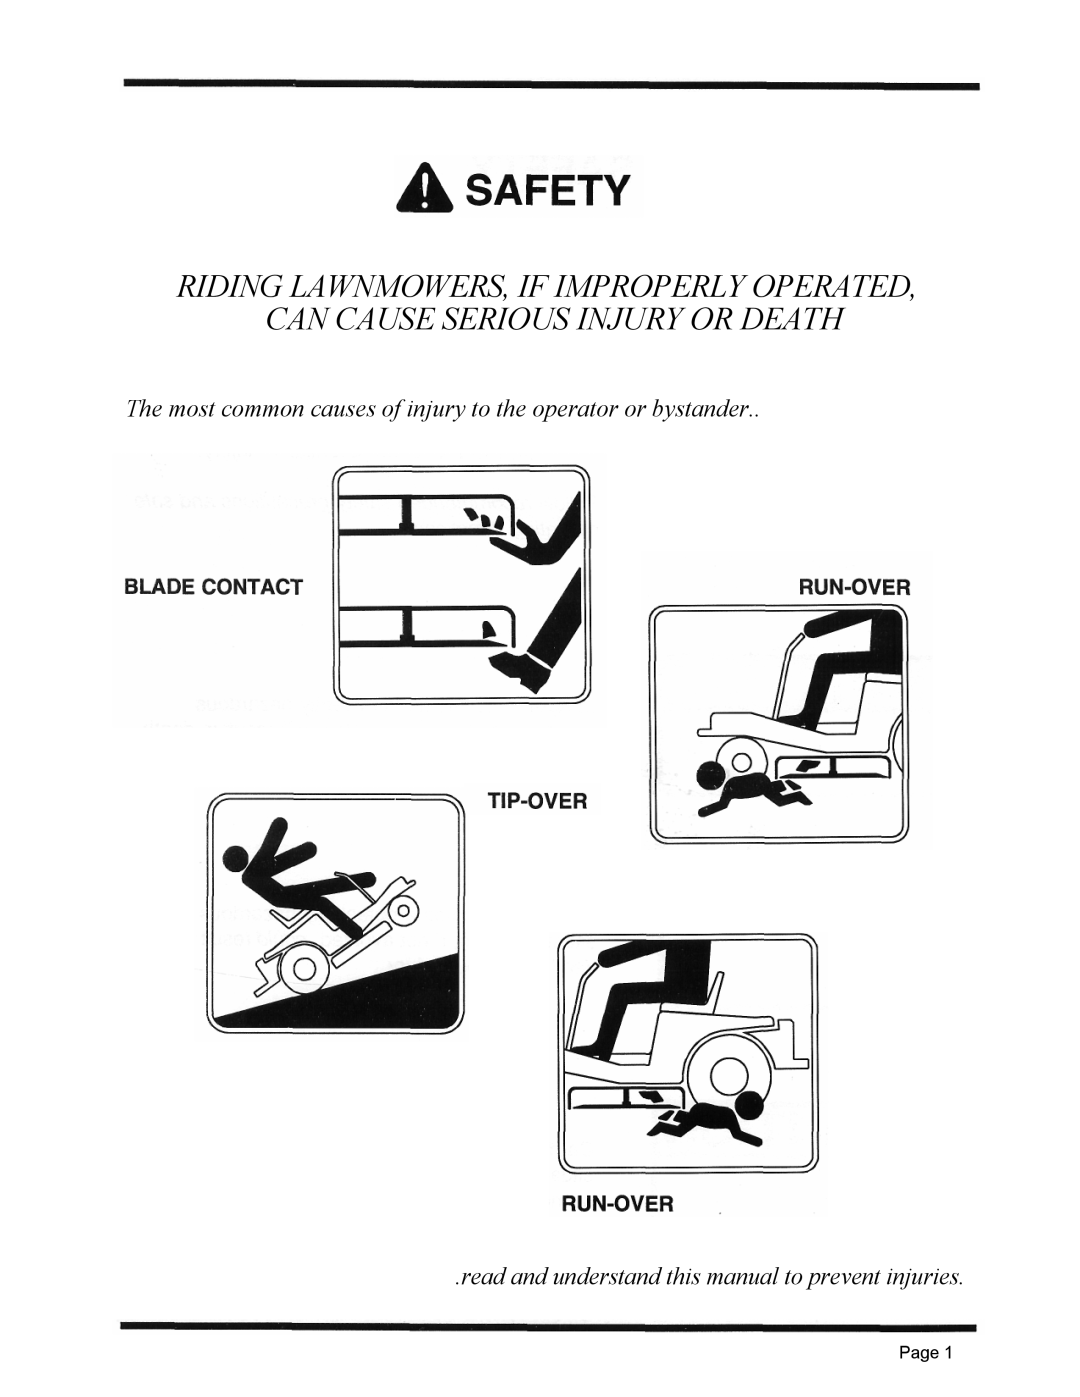 Dixon 4500 Series manual The most common causes of injury to the operator or bystander, Page 